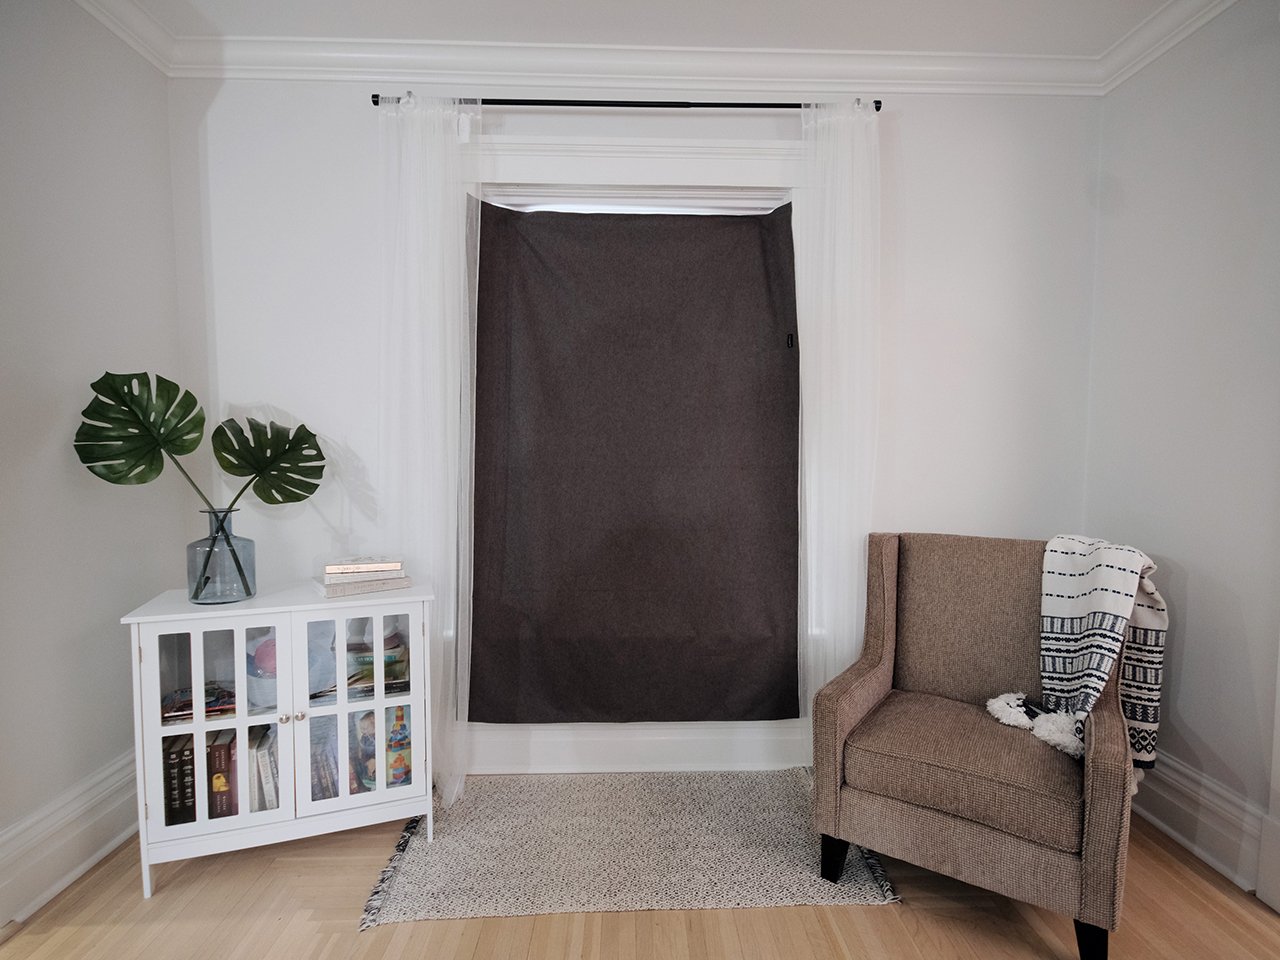 Blackout curtain in front of windor in white room with a rown chair and small white bookshelf.